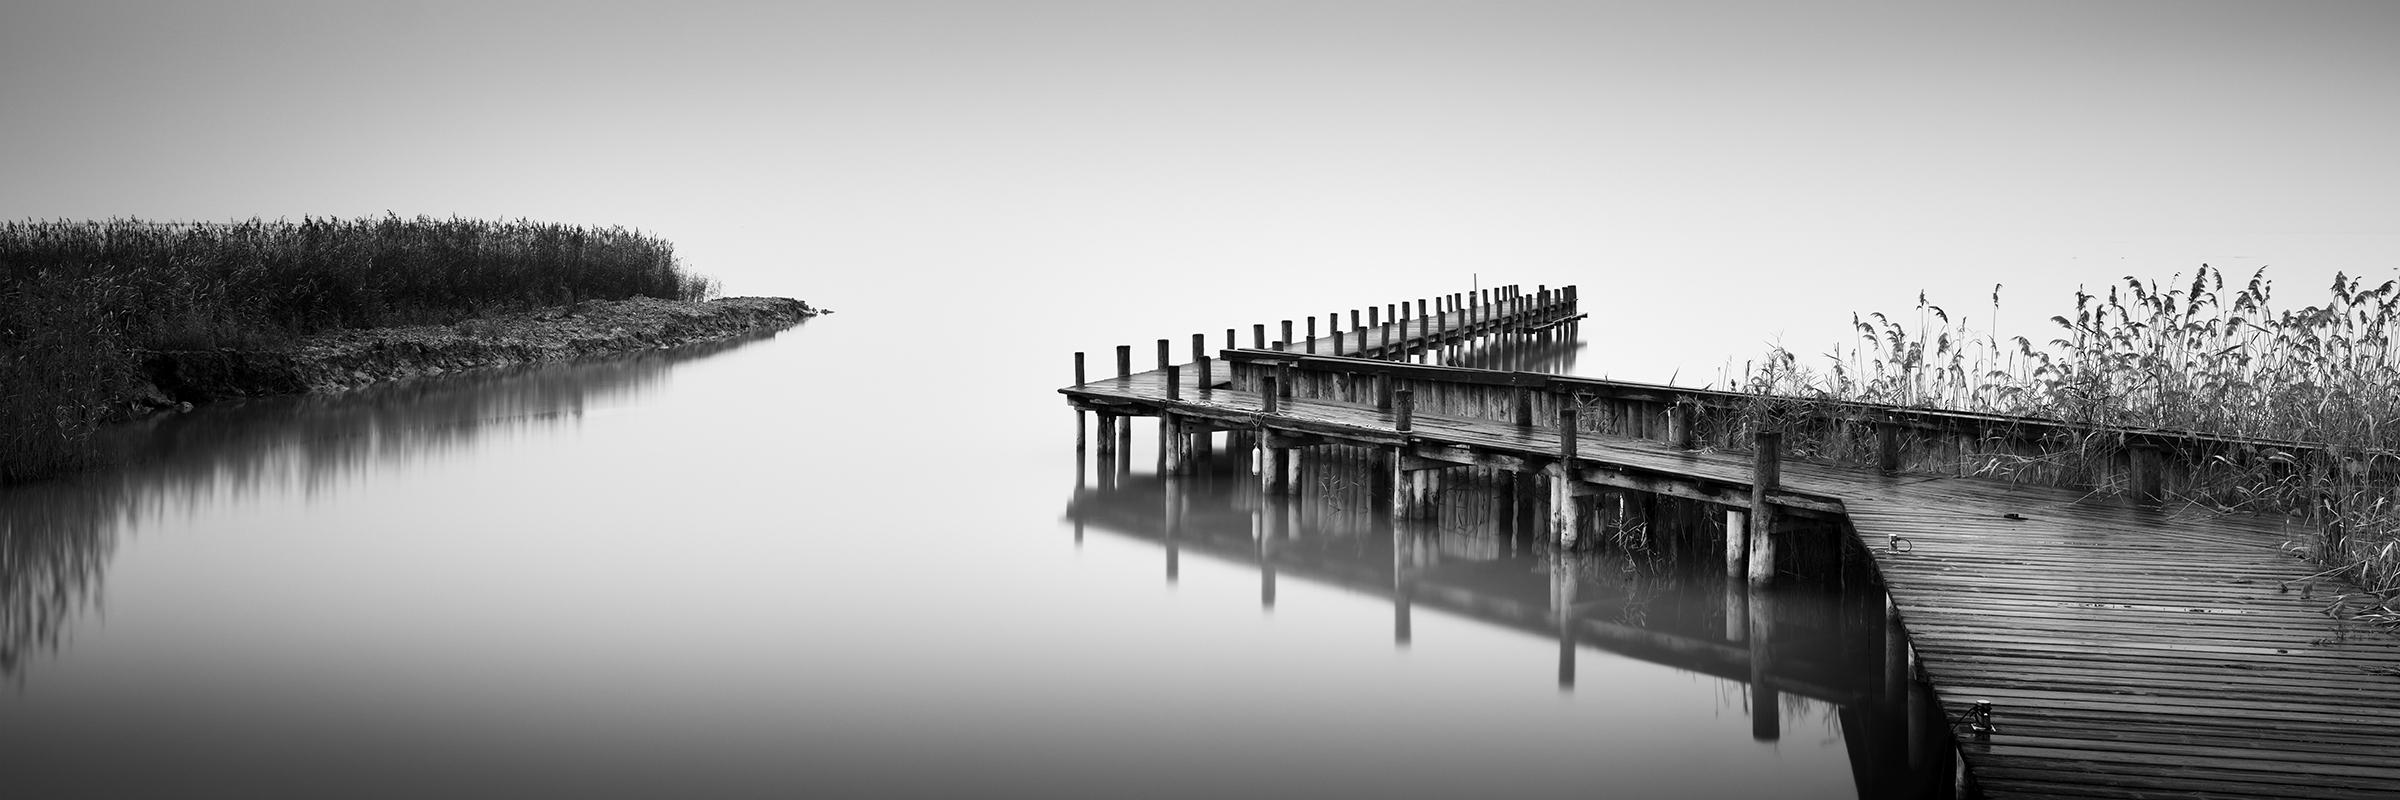 Gerald Berghammer Black and White Photograph - Jetty on calm Lake Panorama, black and white photography, waterscape fine art 